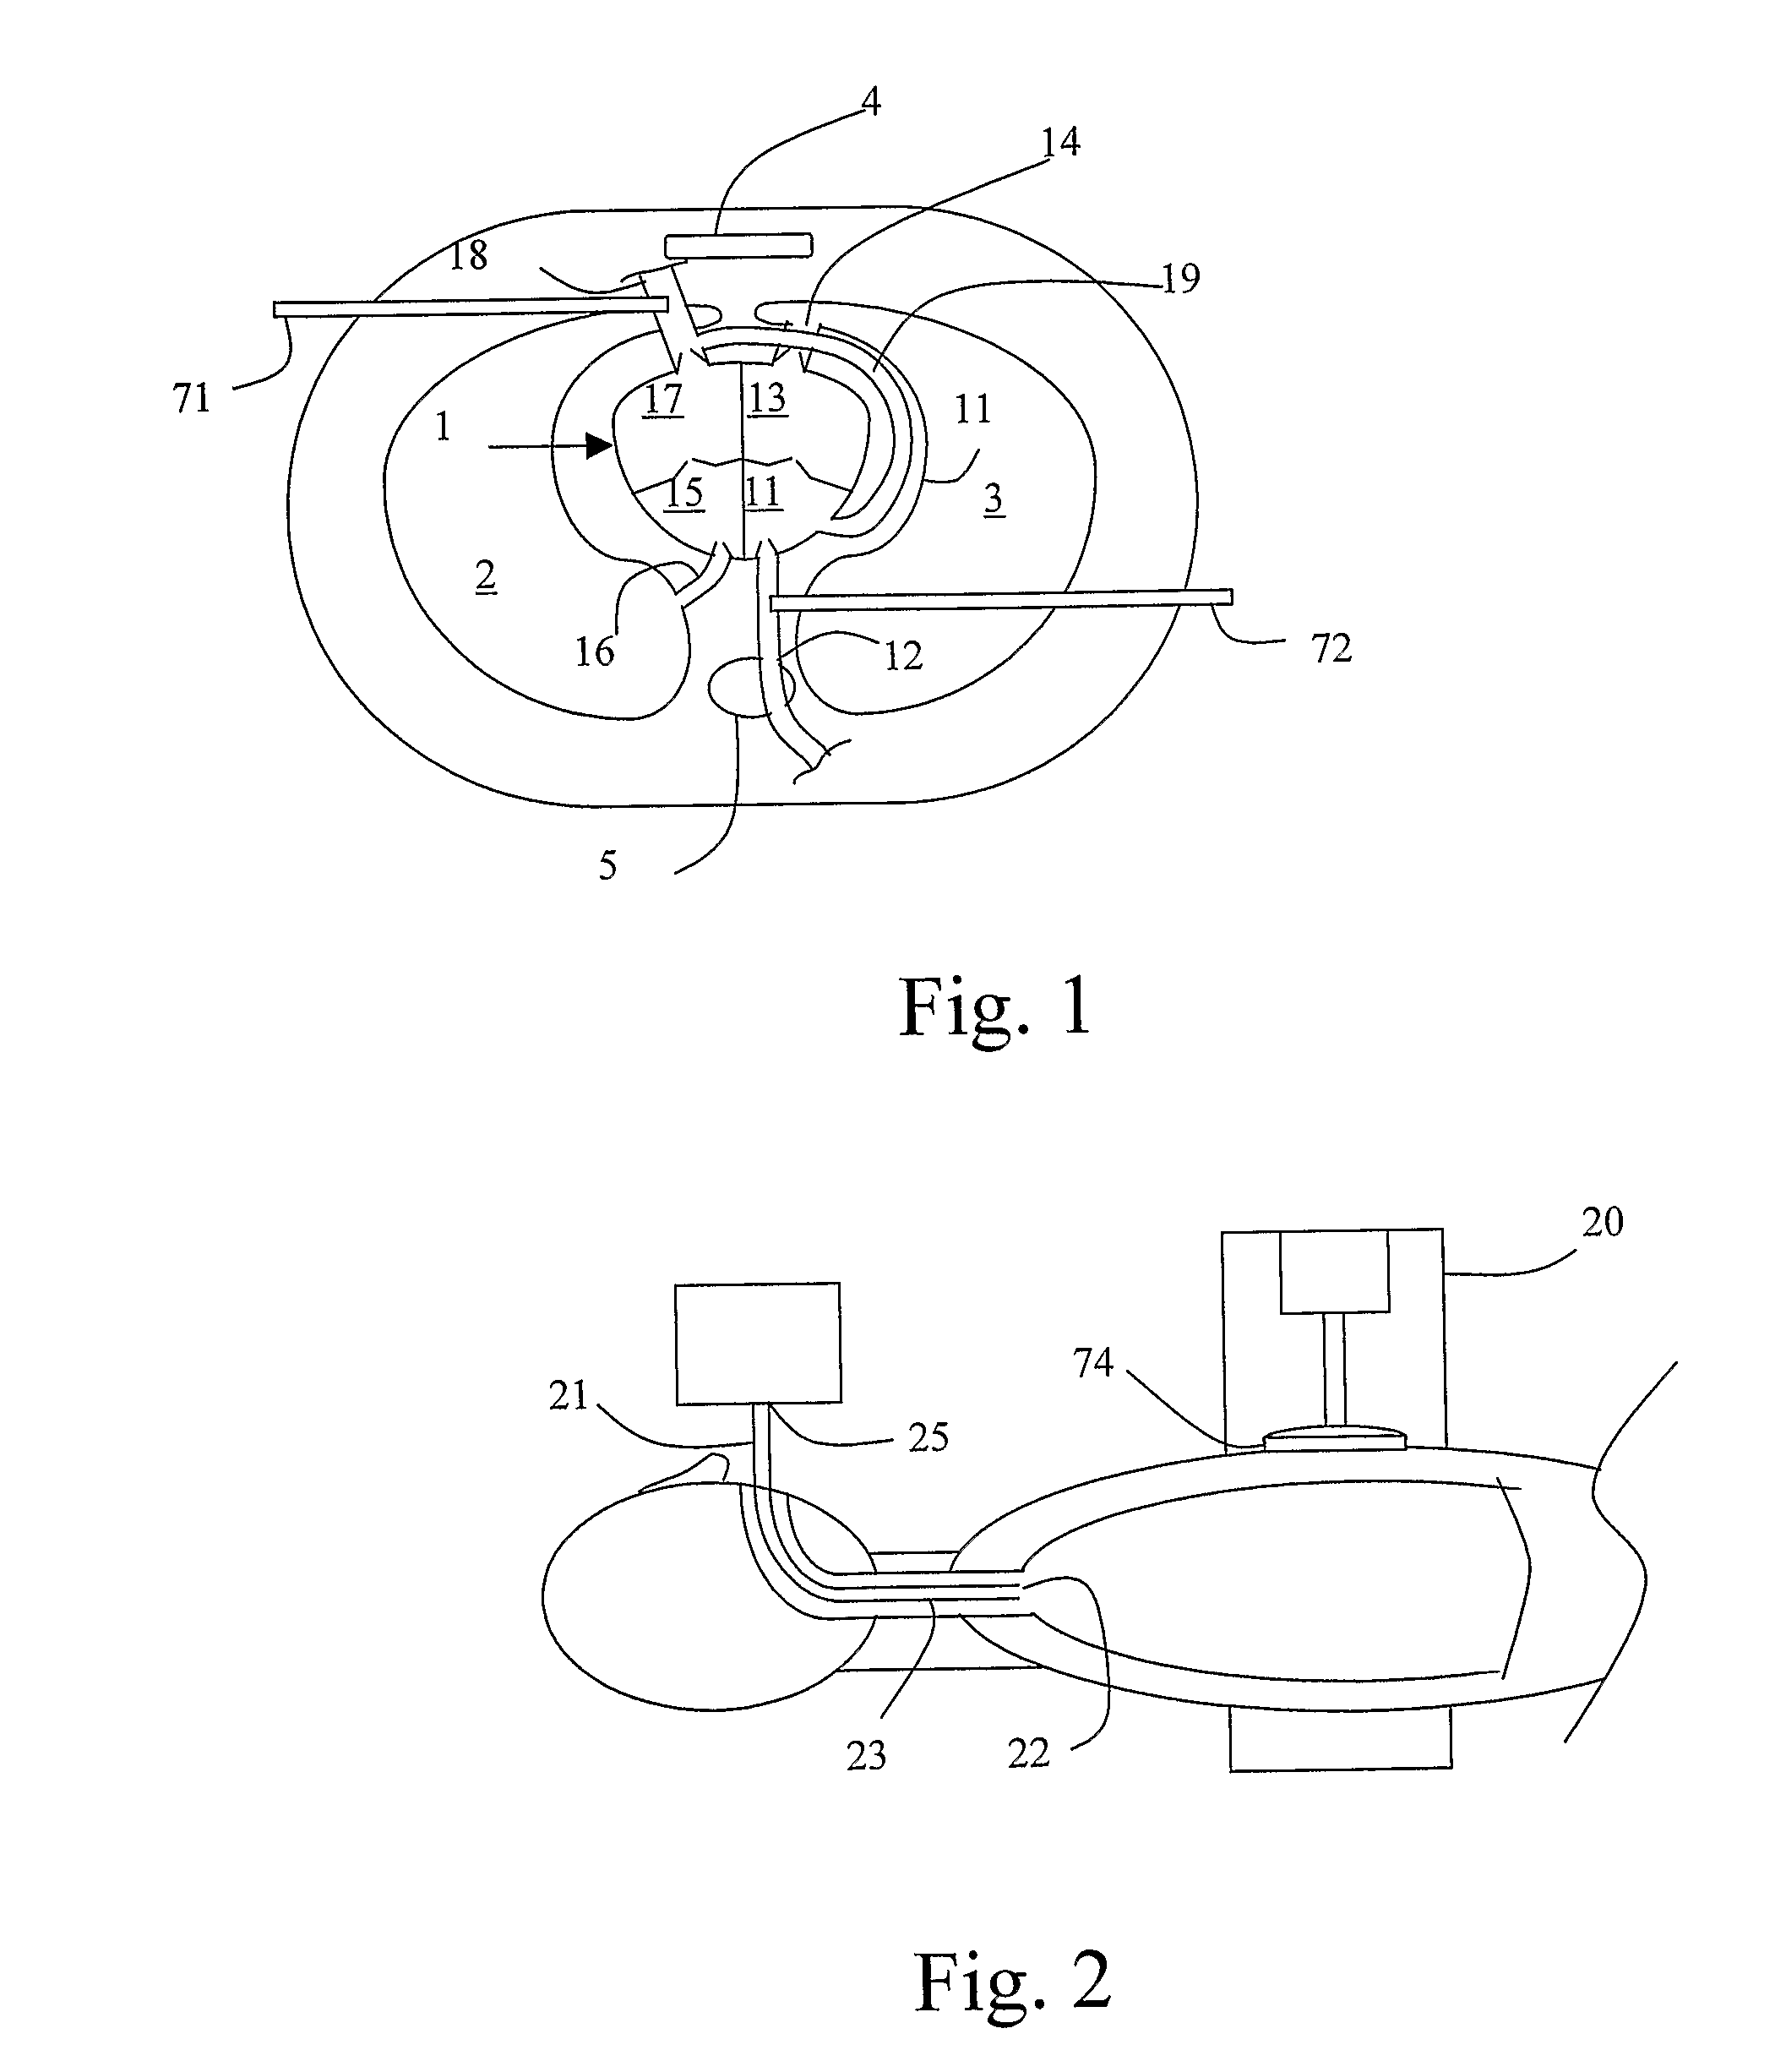 Method and device for gas supply during cardiopulmonary resuscitation